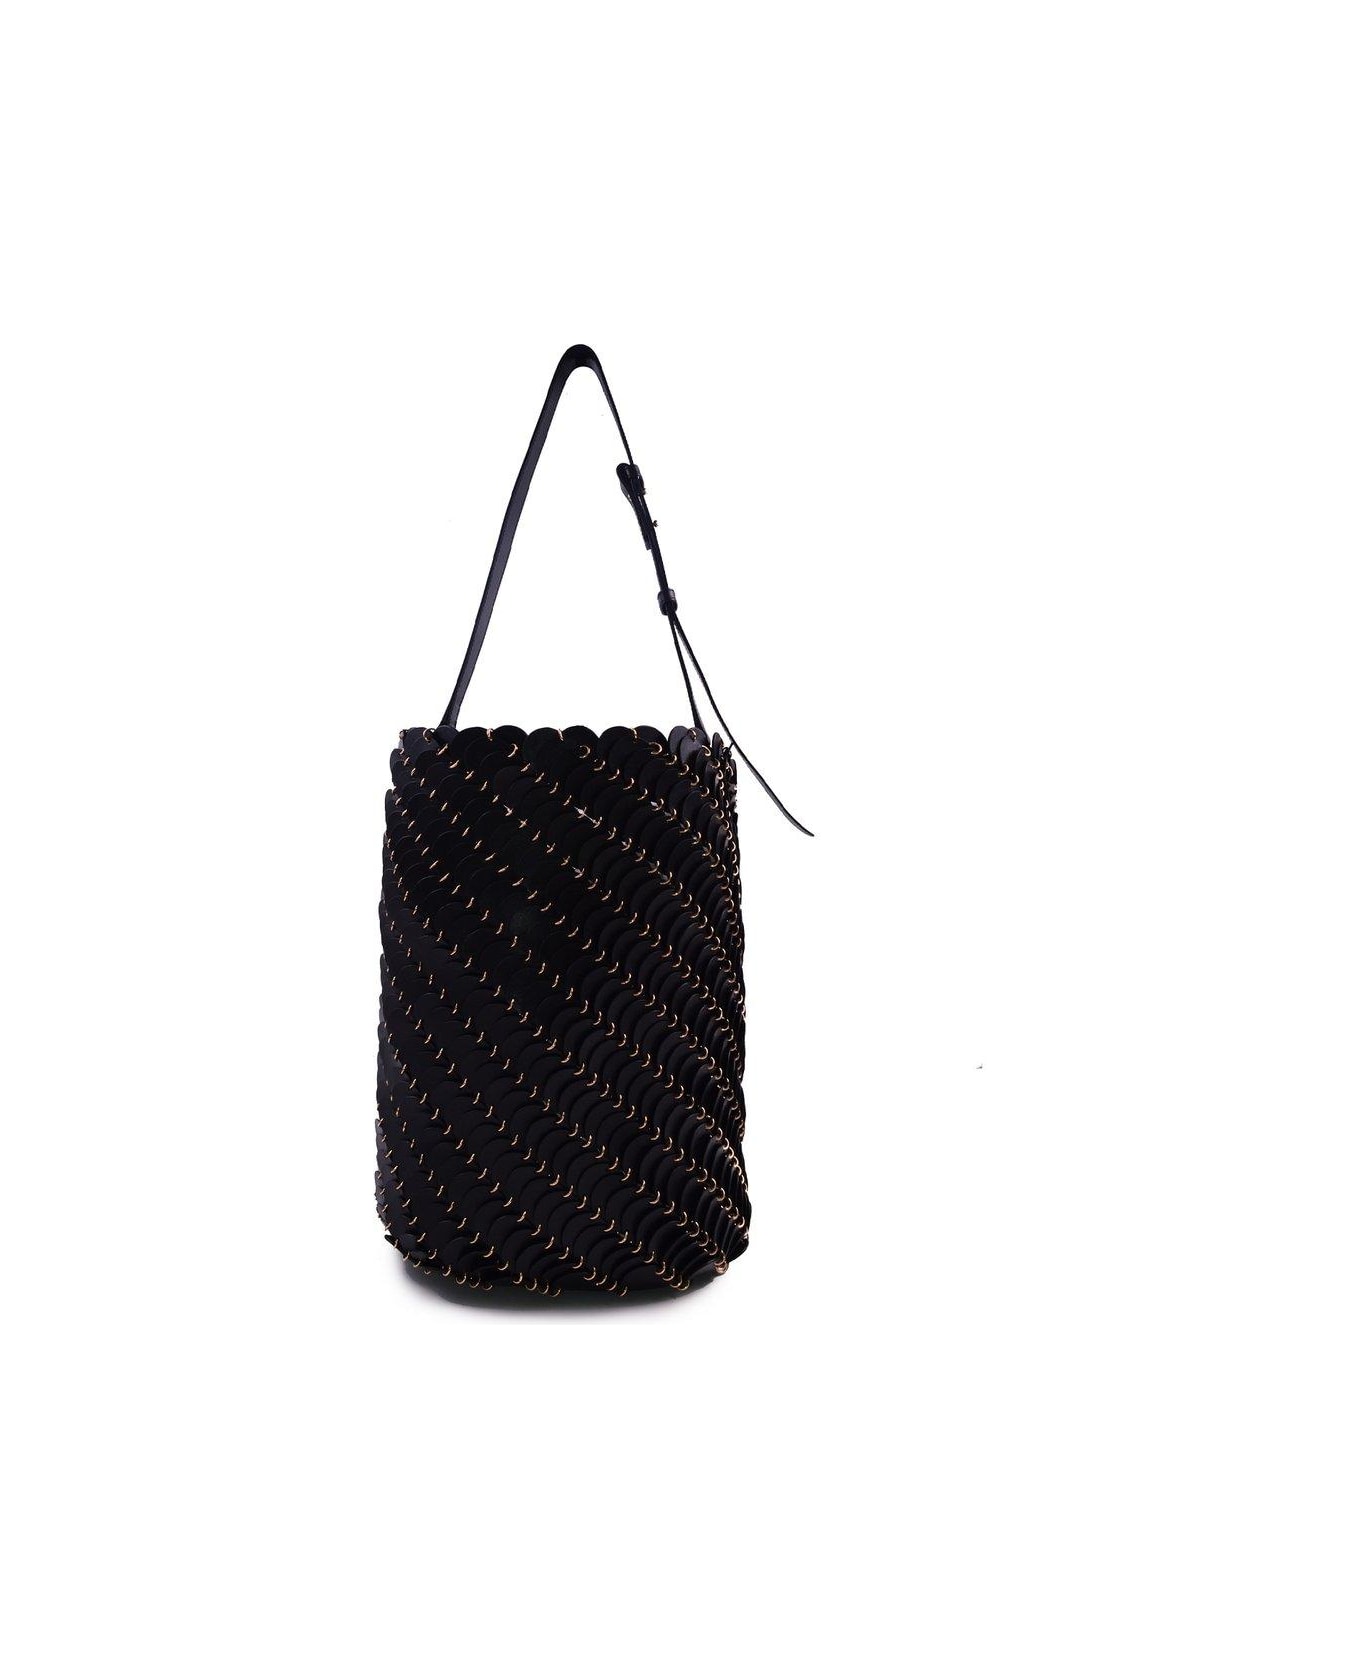 Paco Rabanne Large Paco Bucket Bag トートバッグ